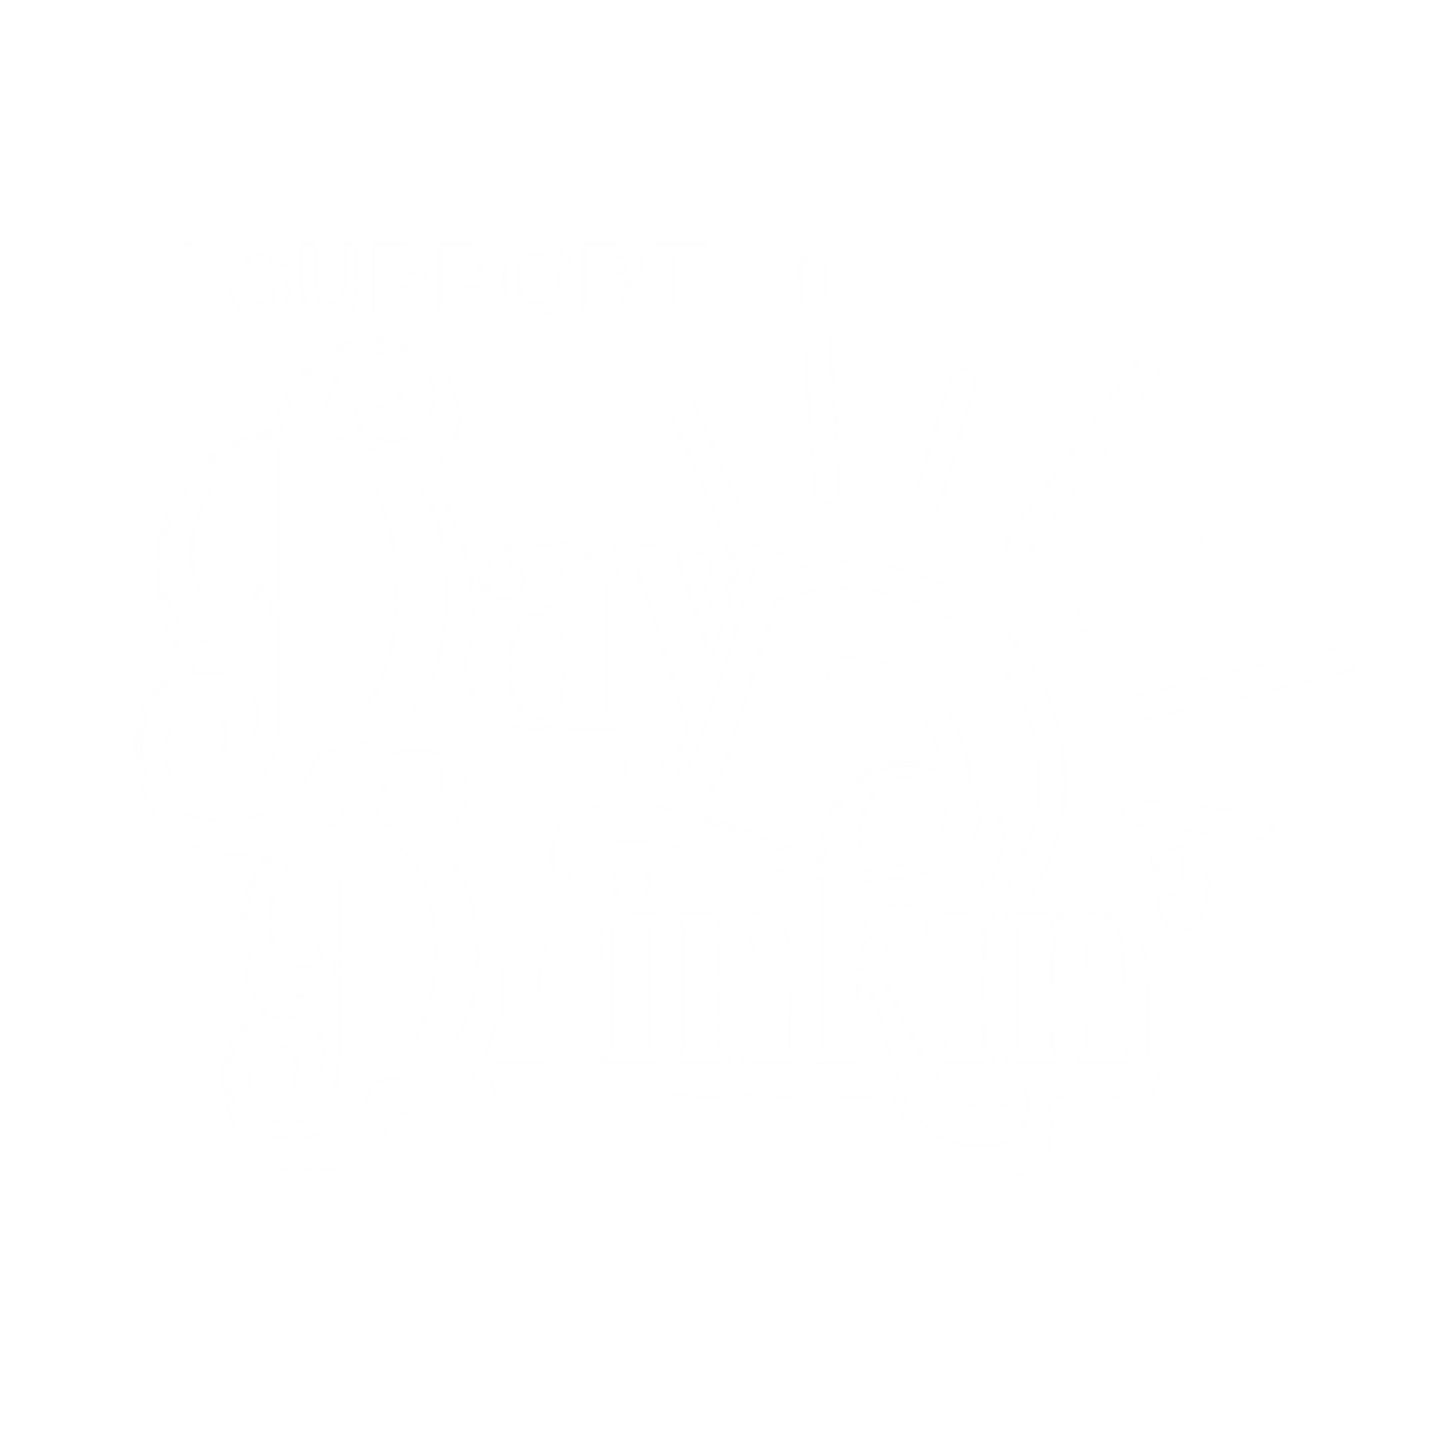 I Support Day Drinking